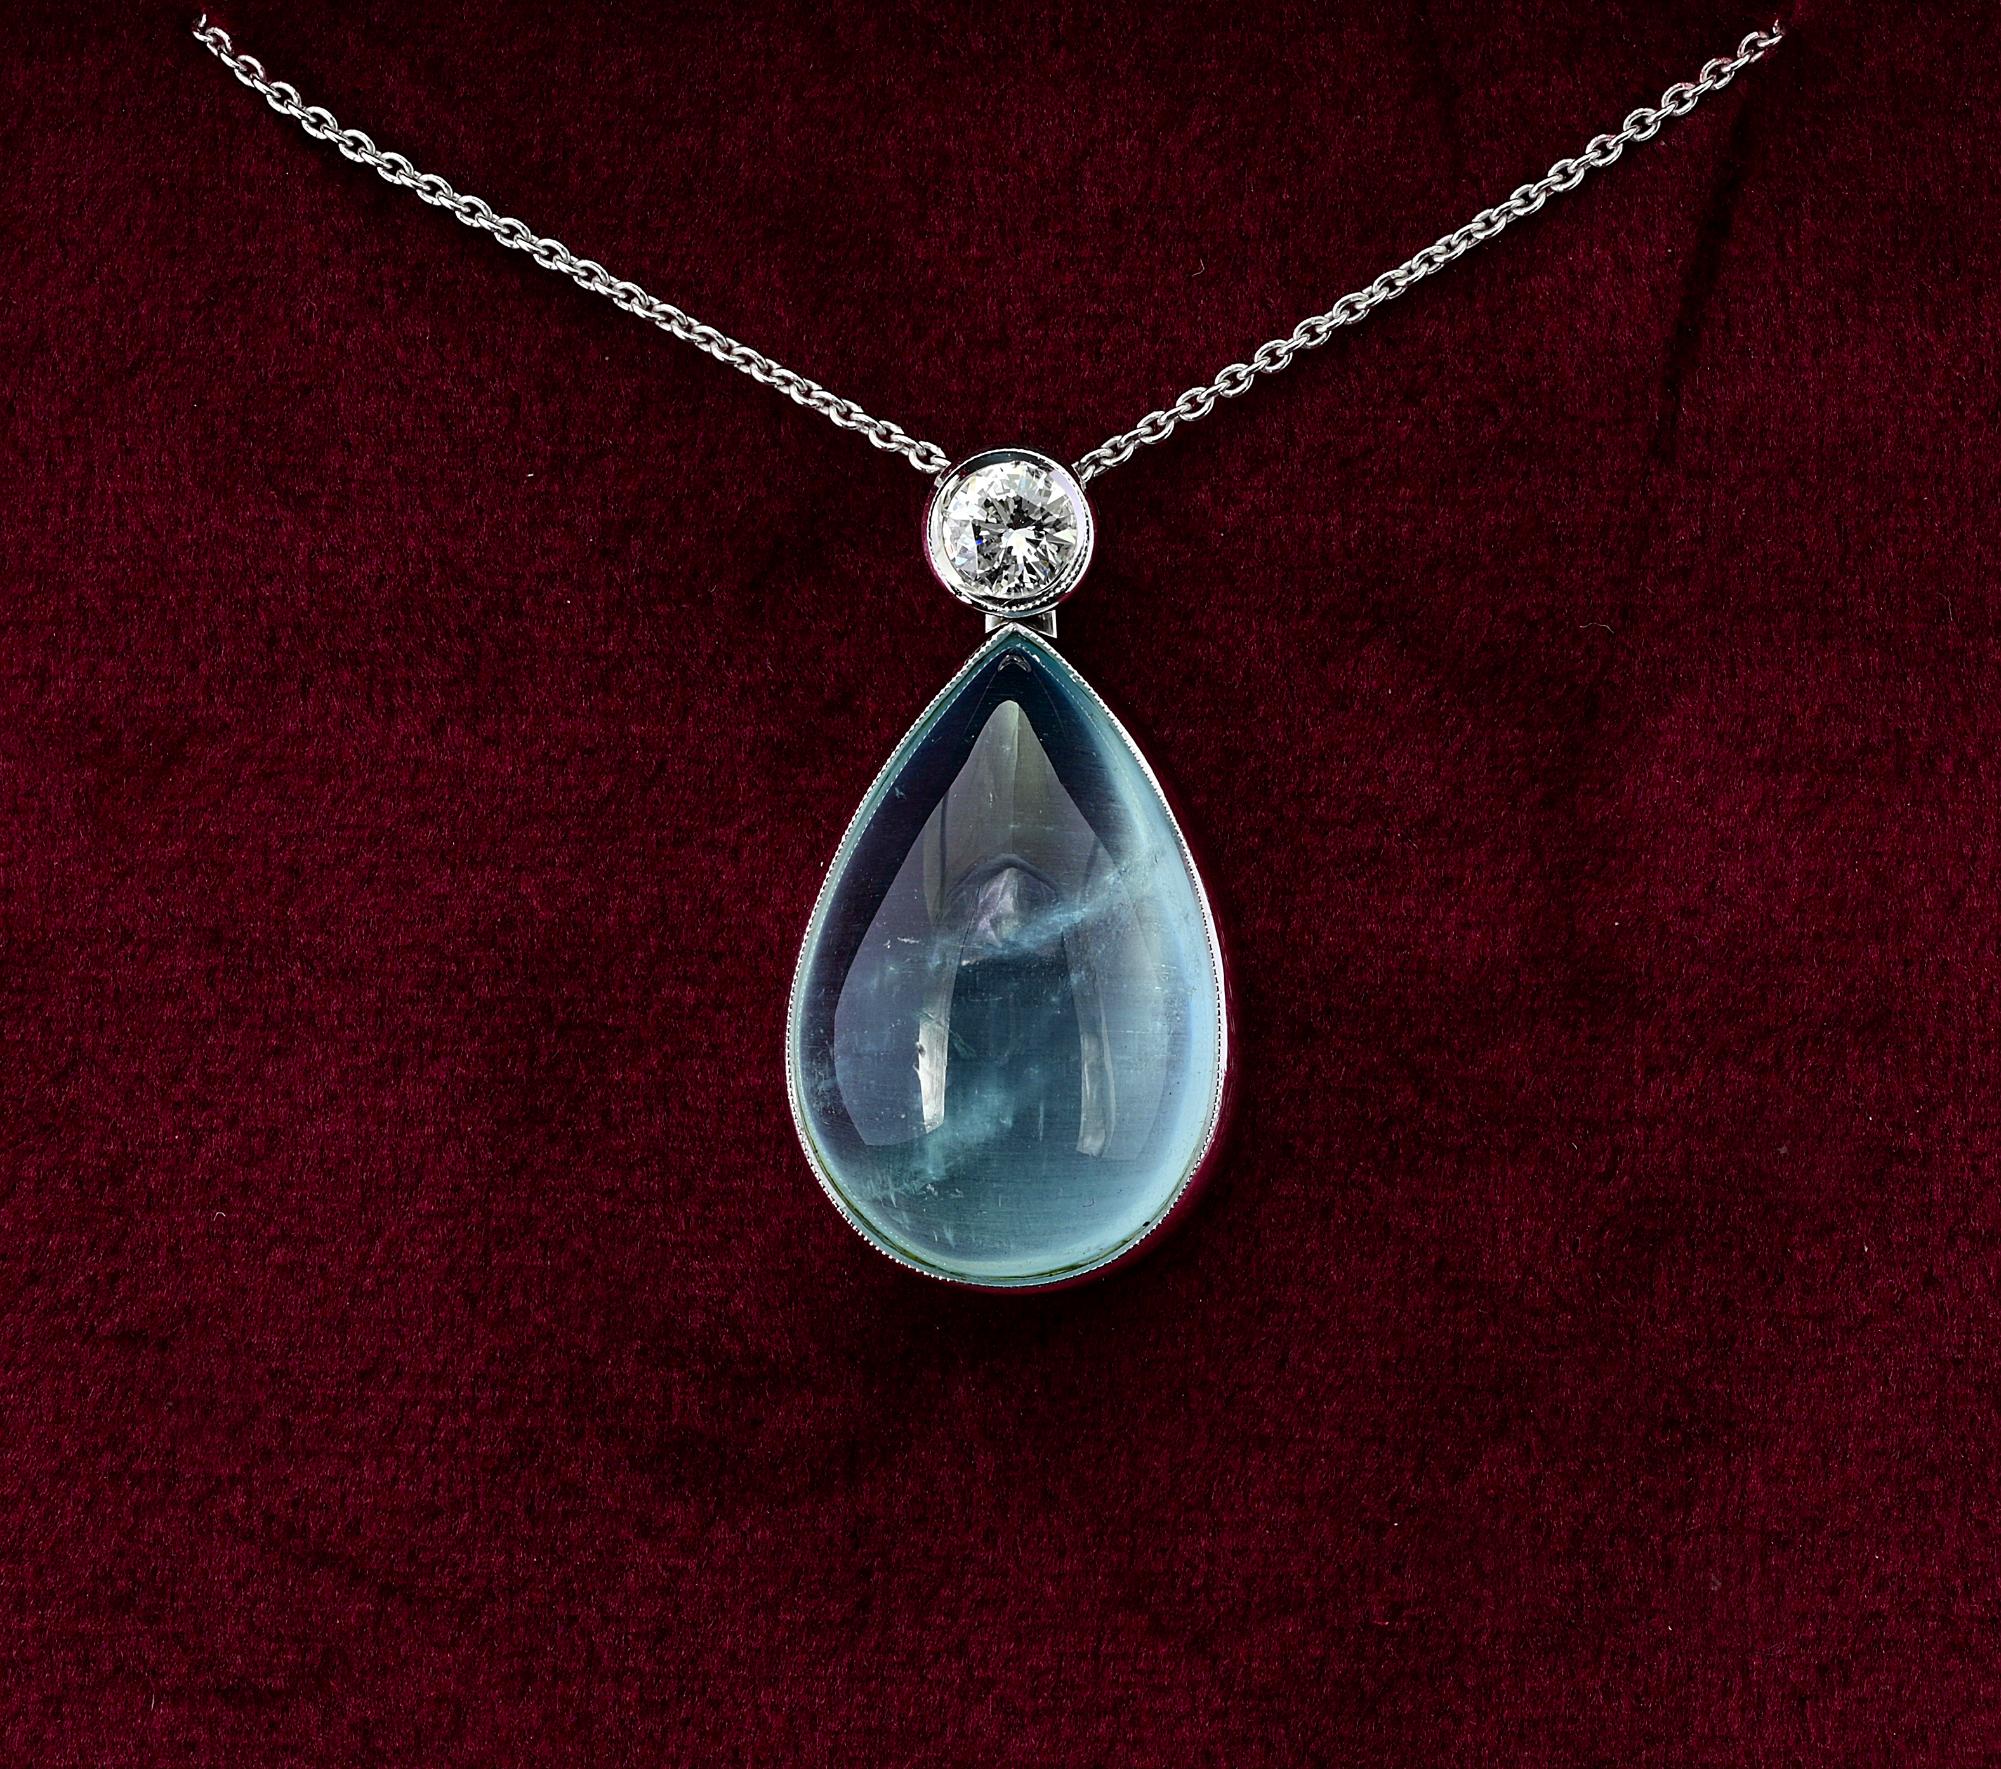 This beautiful Art Deco Style Aquamarine & Diamond drop pendant has been hand crafted of solid 18 KT gold in a classy, timeless design – matched with a 18 Kt solid gold chain which slides from the top
Aquamarine is a large 17.80 Ct (21.87 x 14.4